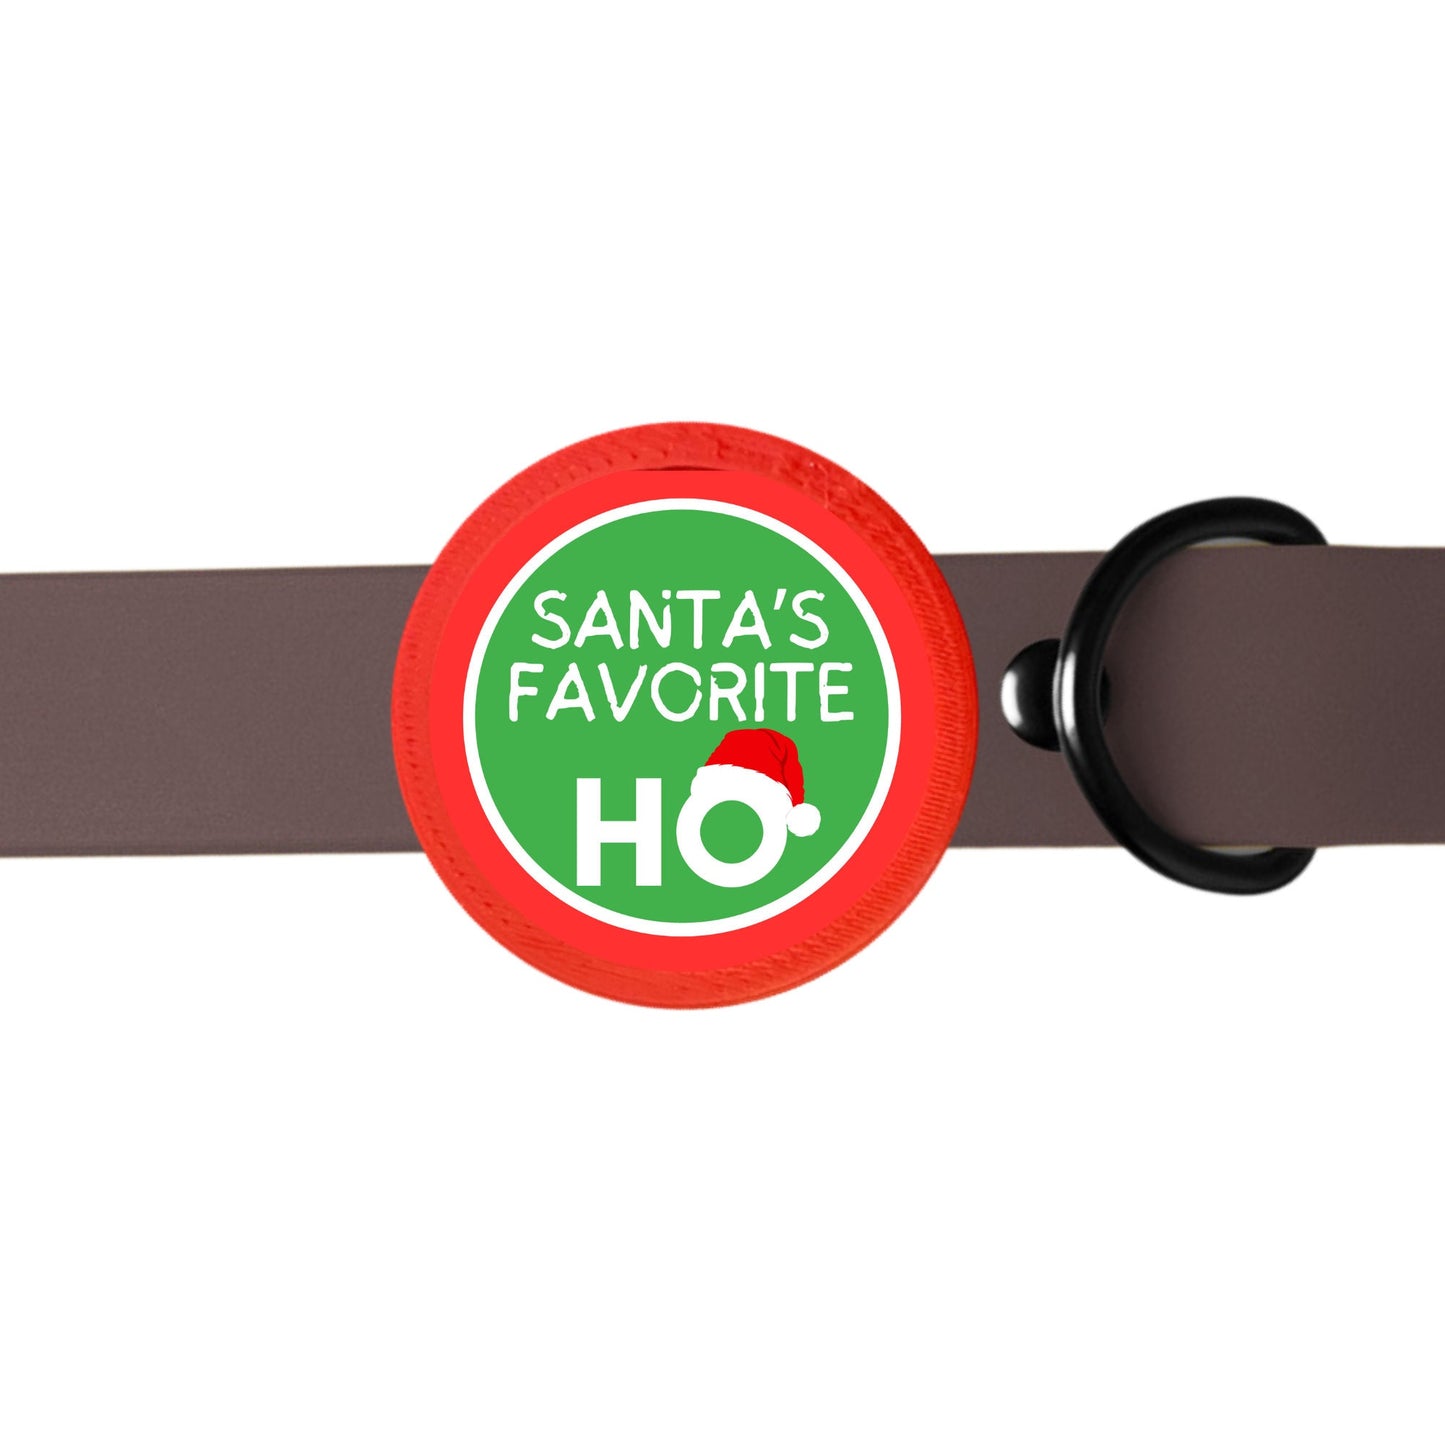 Santa's Favorite Ho Christmas Pet Tag- Silent, Eco-Friendly, Ringless ID Tag for Cats and Dogs